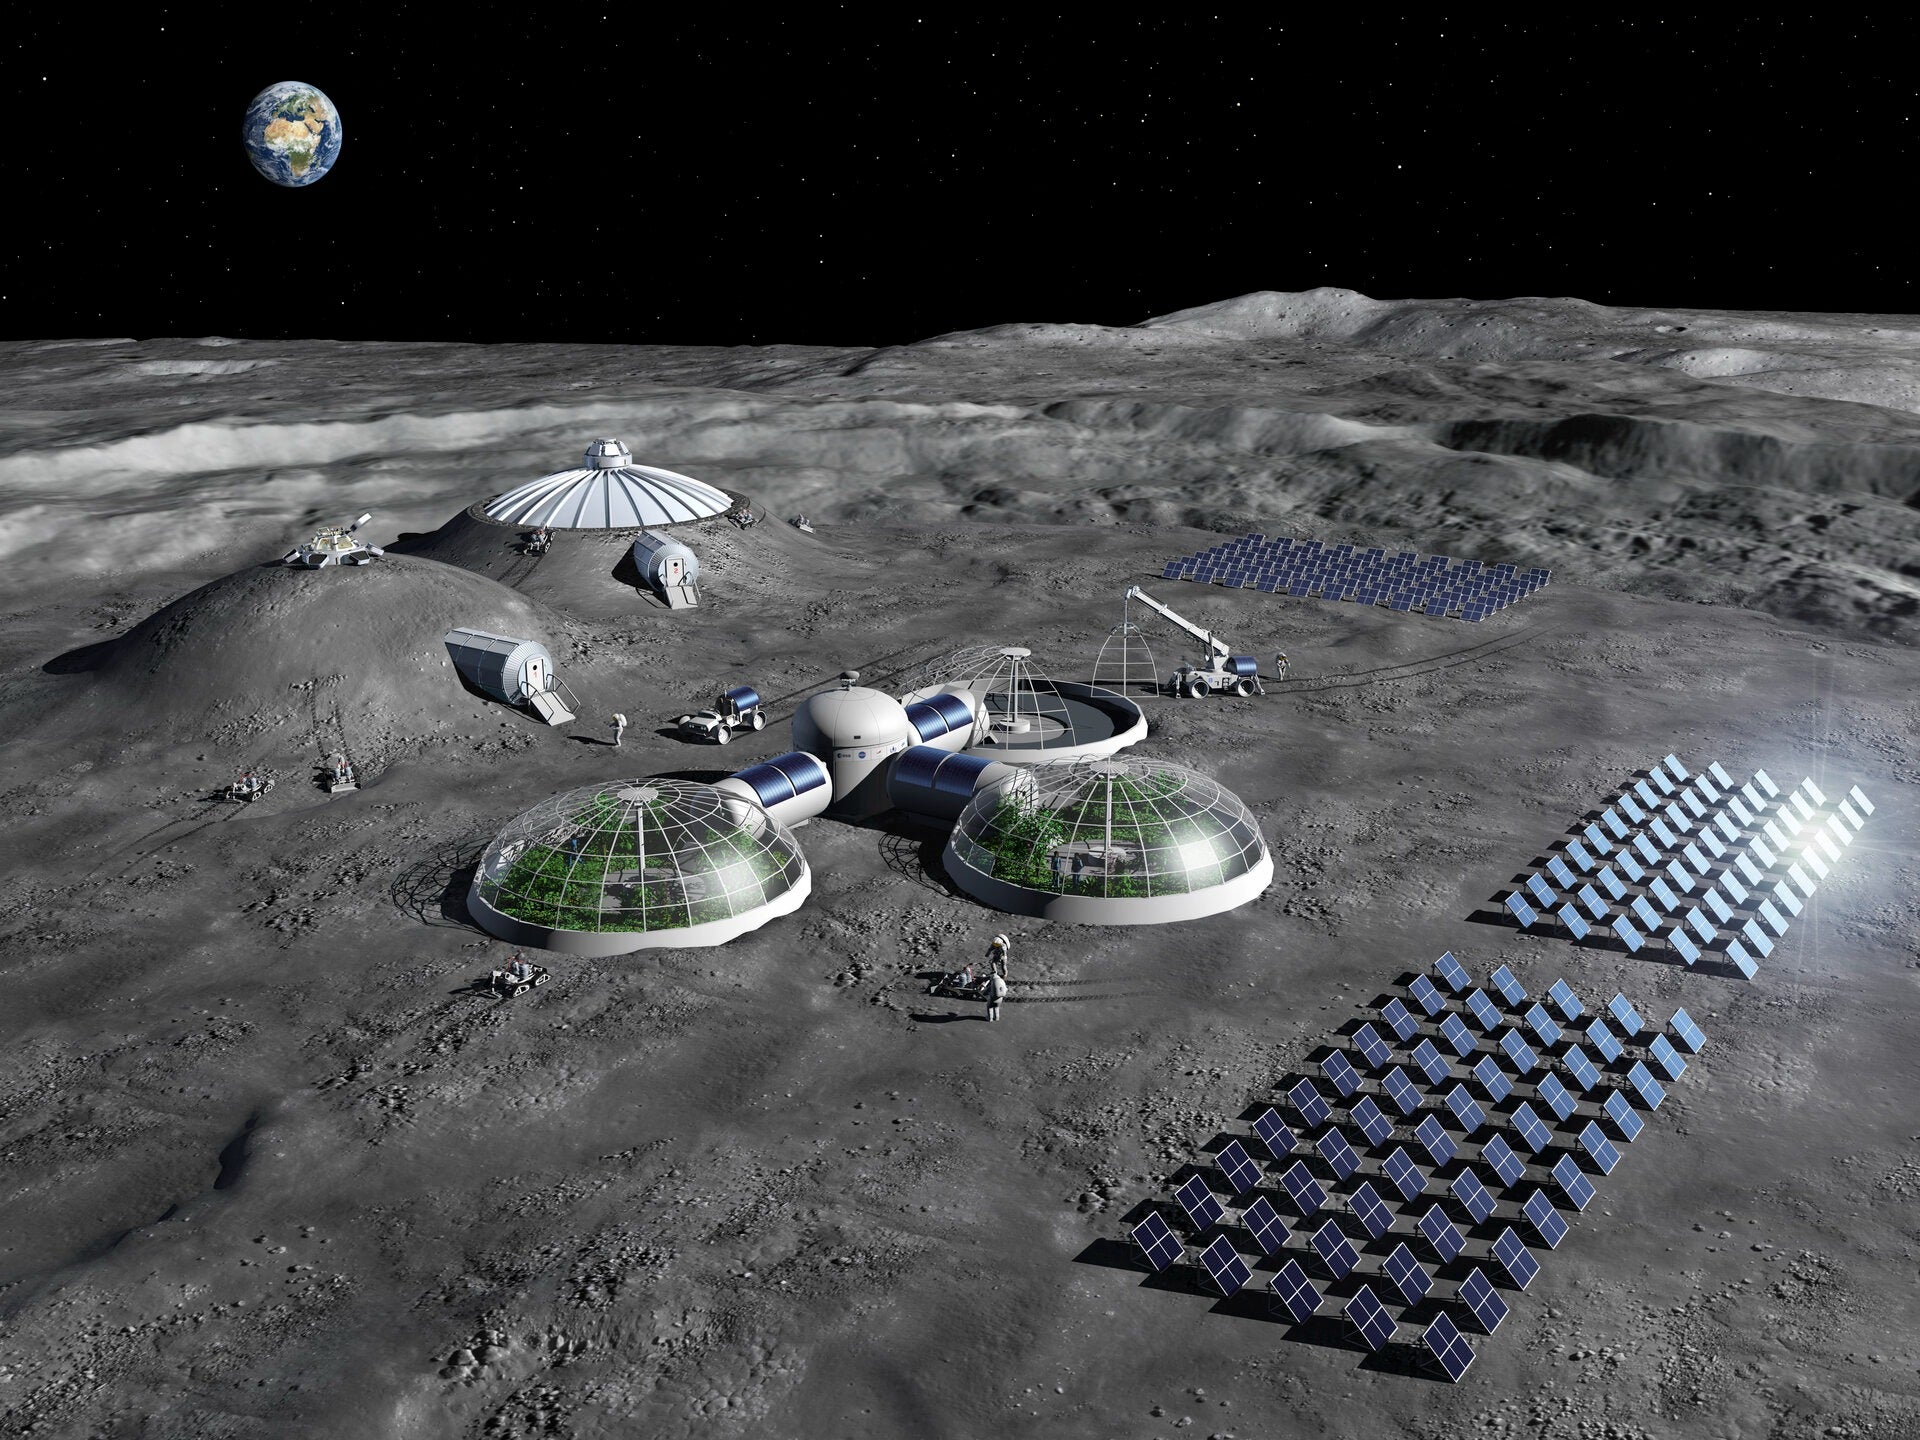 This artist impression of a Moon base shows olar arrays for energy generation, greenhouses for food production, and habitats shielded with regolith. Credit ESA.